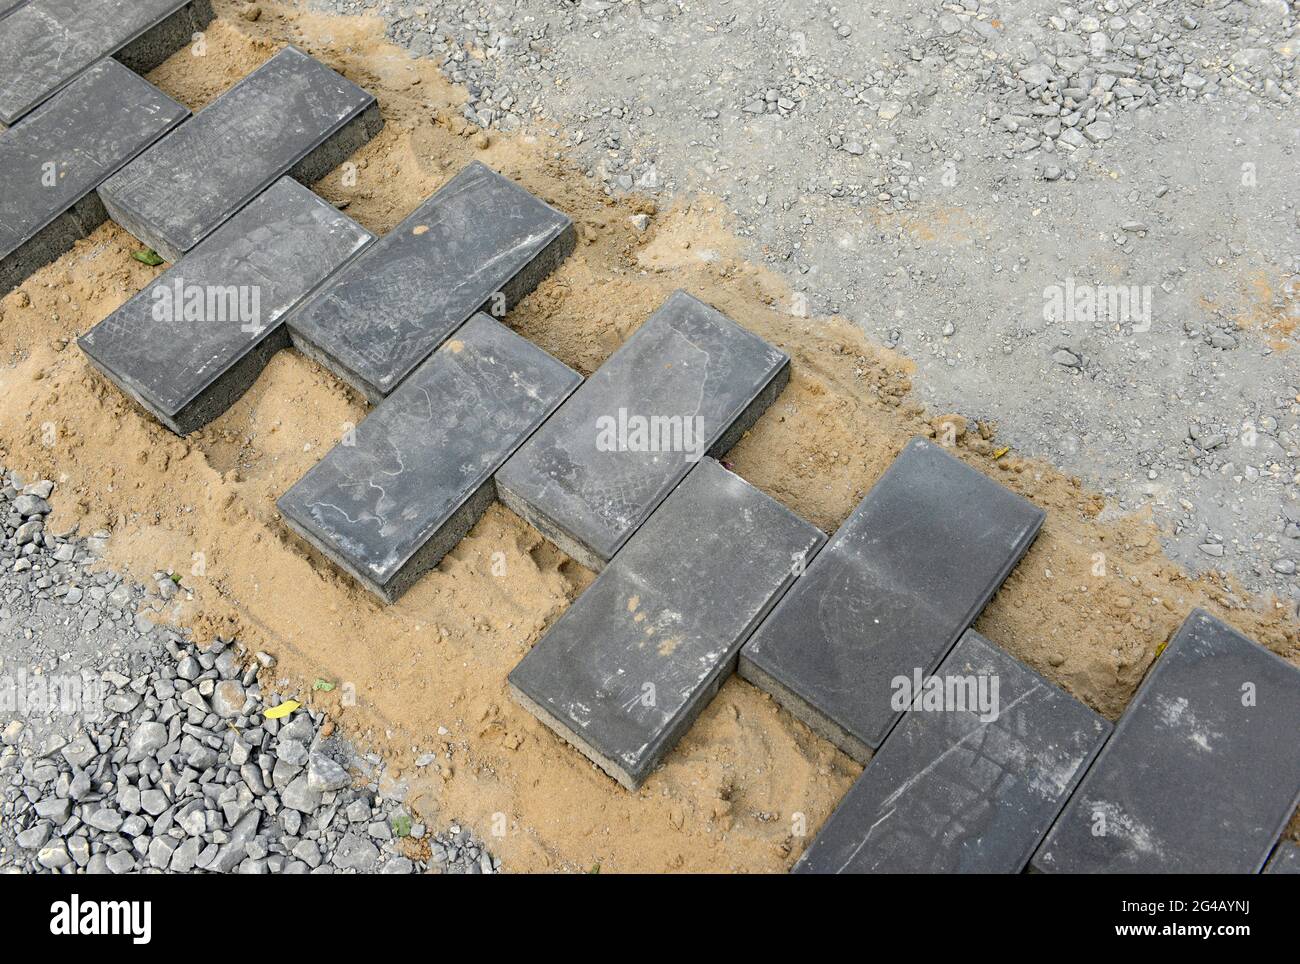 Paving stones laid alternately on a path in Tuanjiehu district of eastern Beijing during hard landscaping work. Beijing, China Stock Photo